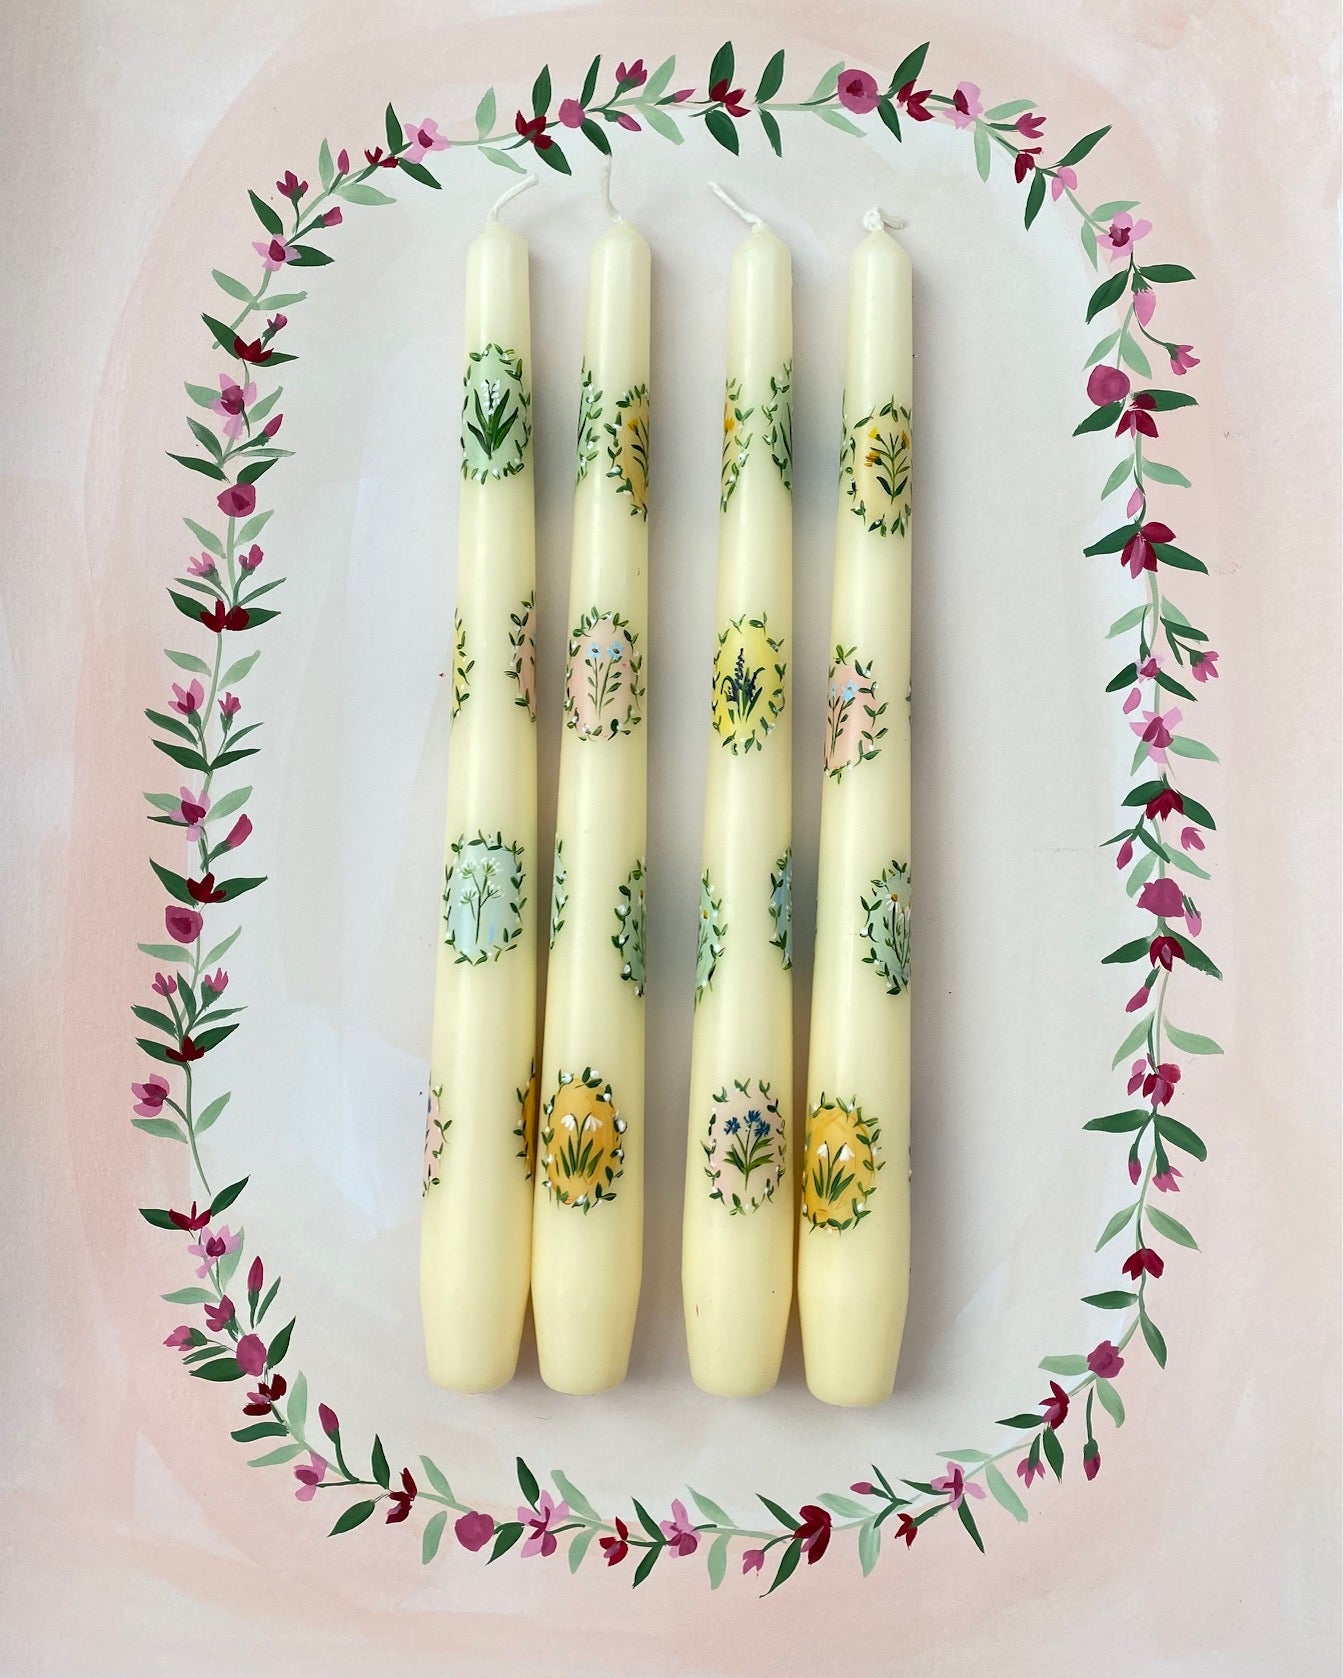 ORNA Hand Painted Miniature Flower Frame Candle